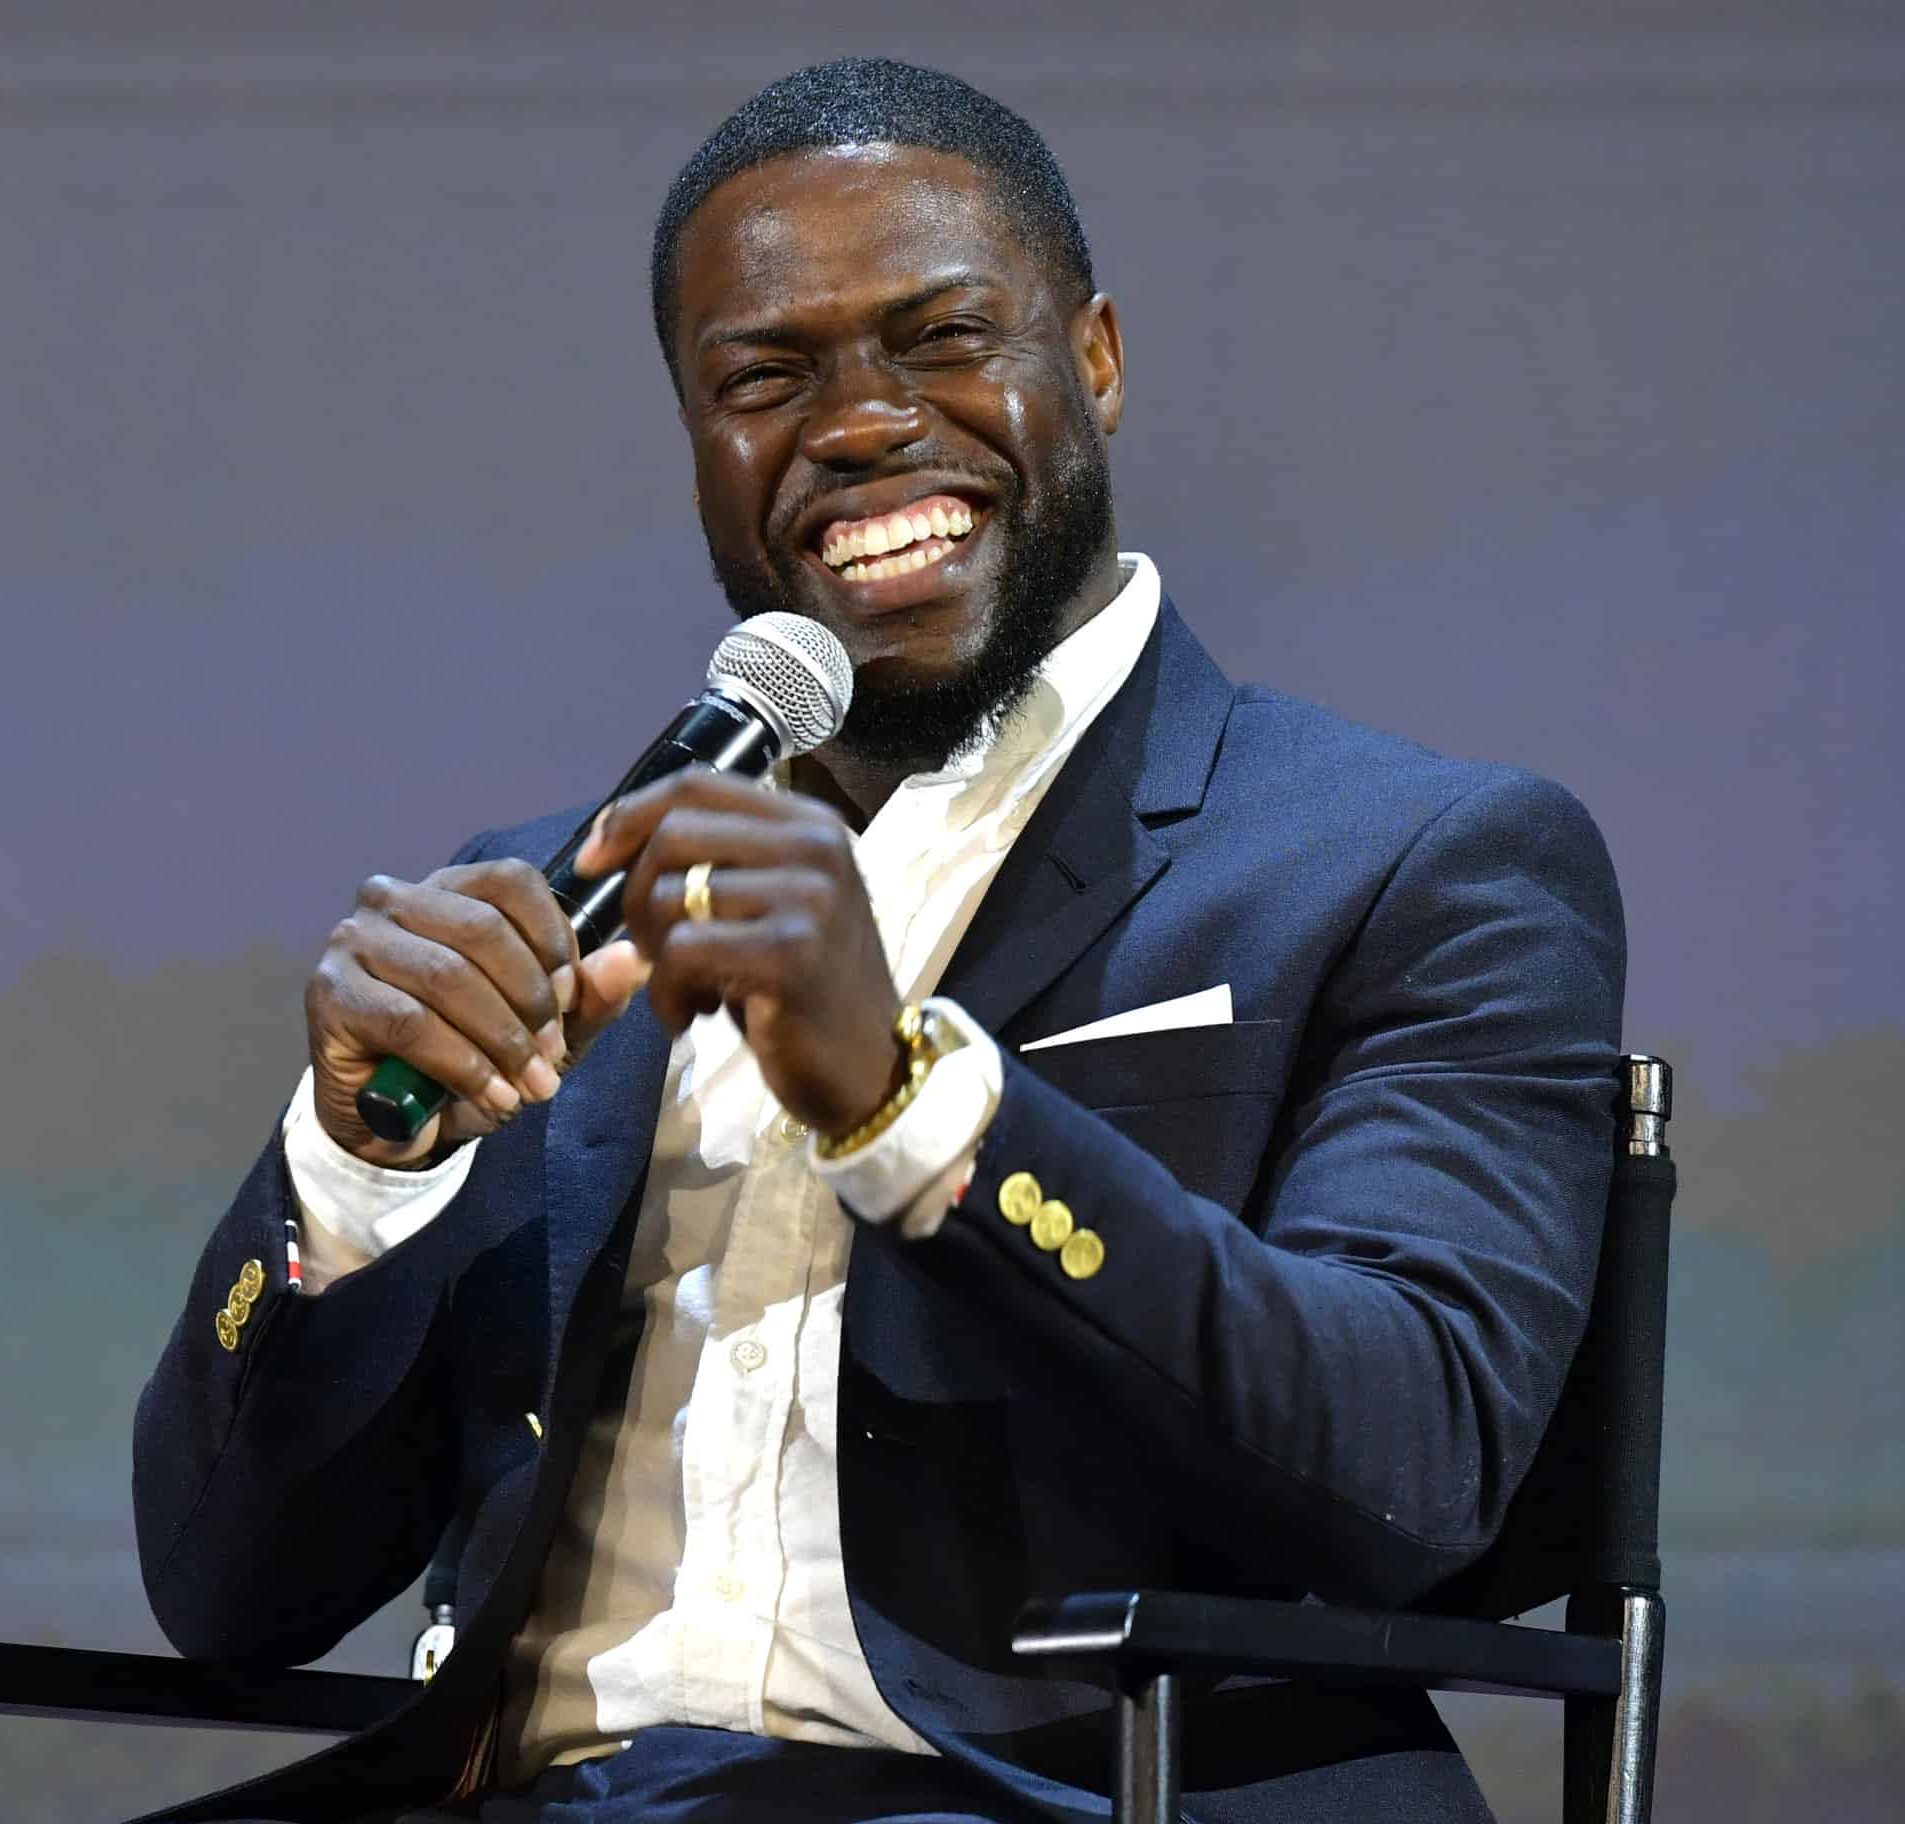 Kevin Hart says daughter confronted him about cheating, speaking ...